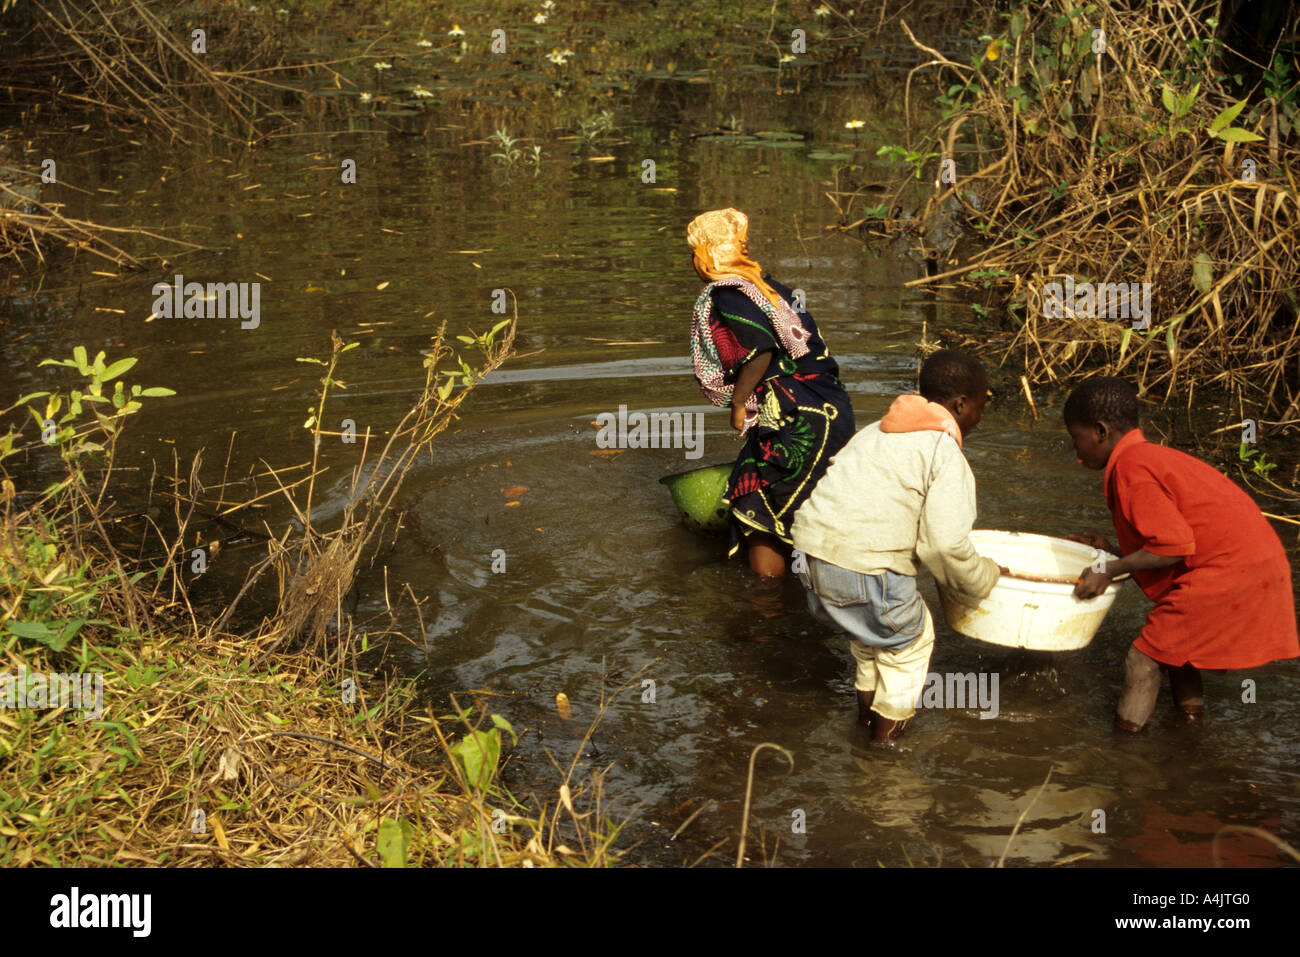 Water Source, Children Getting Water from Pond, Ivory Coast, Cote d'Ivoire. Stock Photo